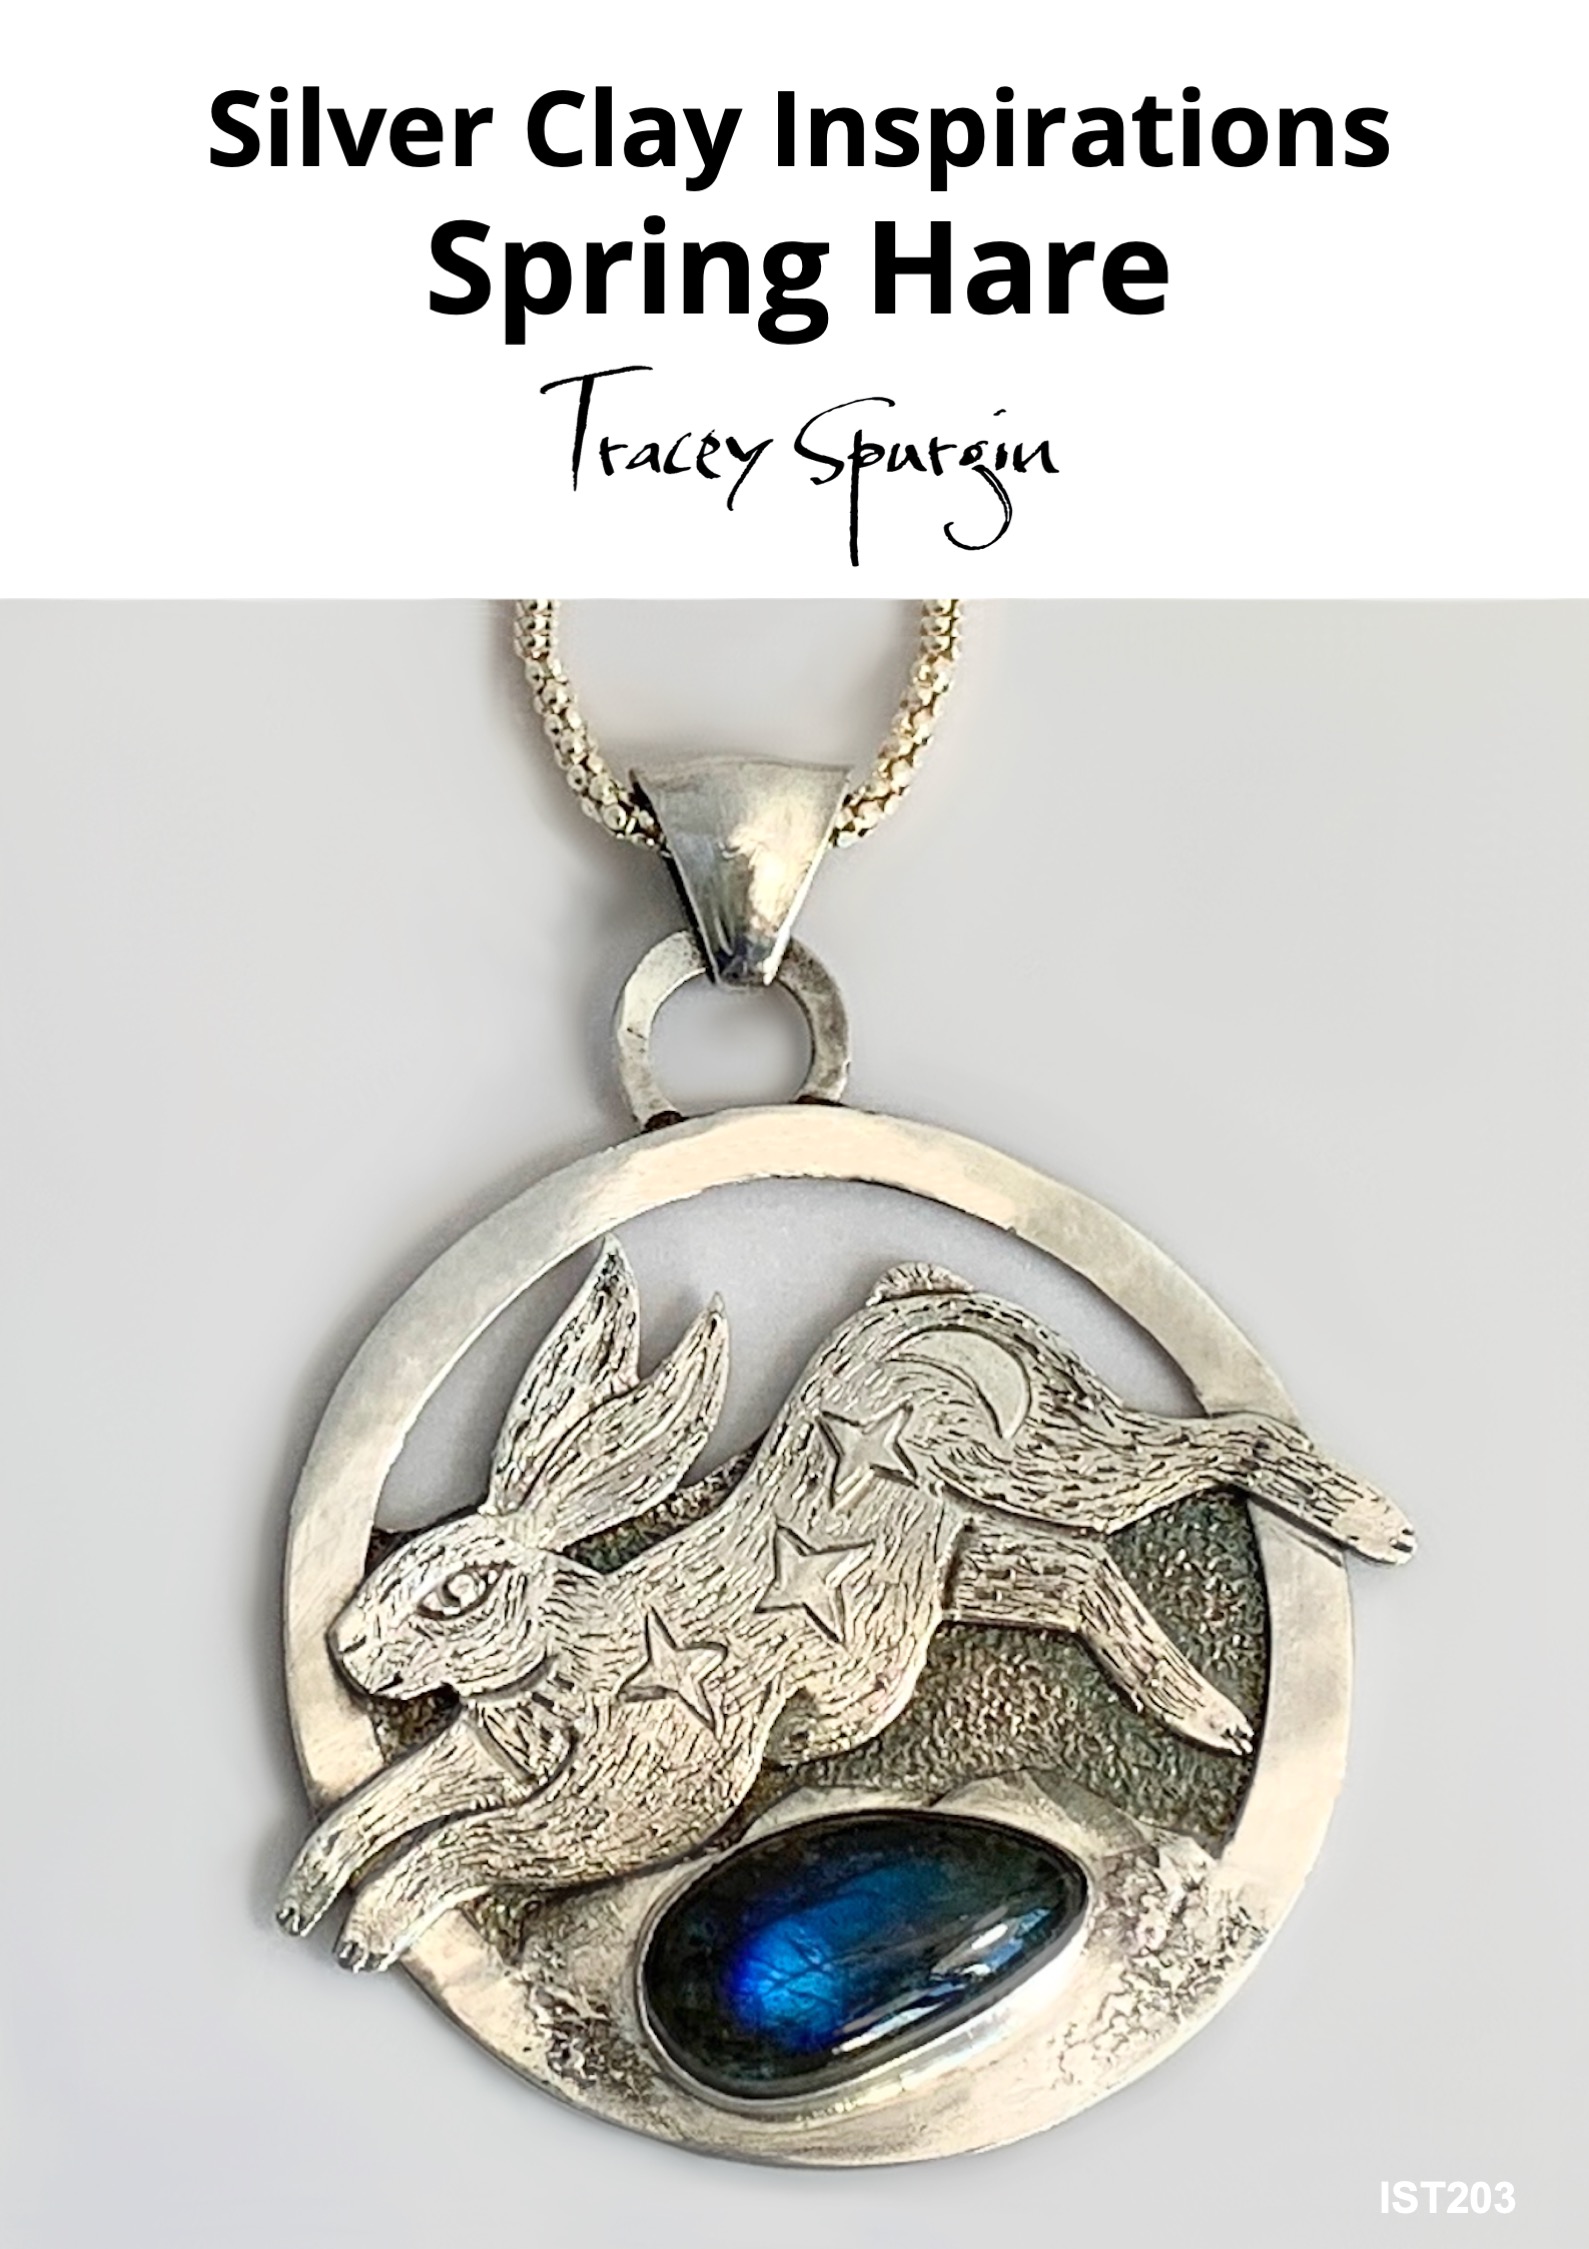 Silver Clay Inspirations Spring Hare Booklet by Tracey Spurgin